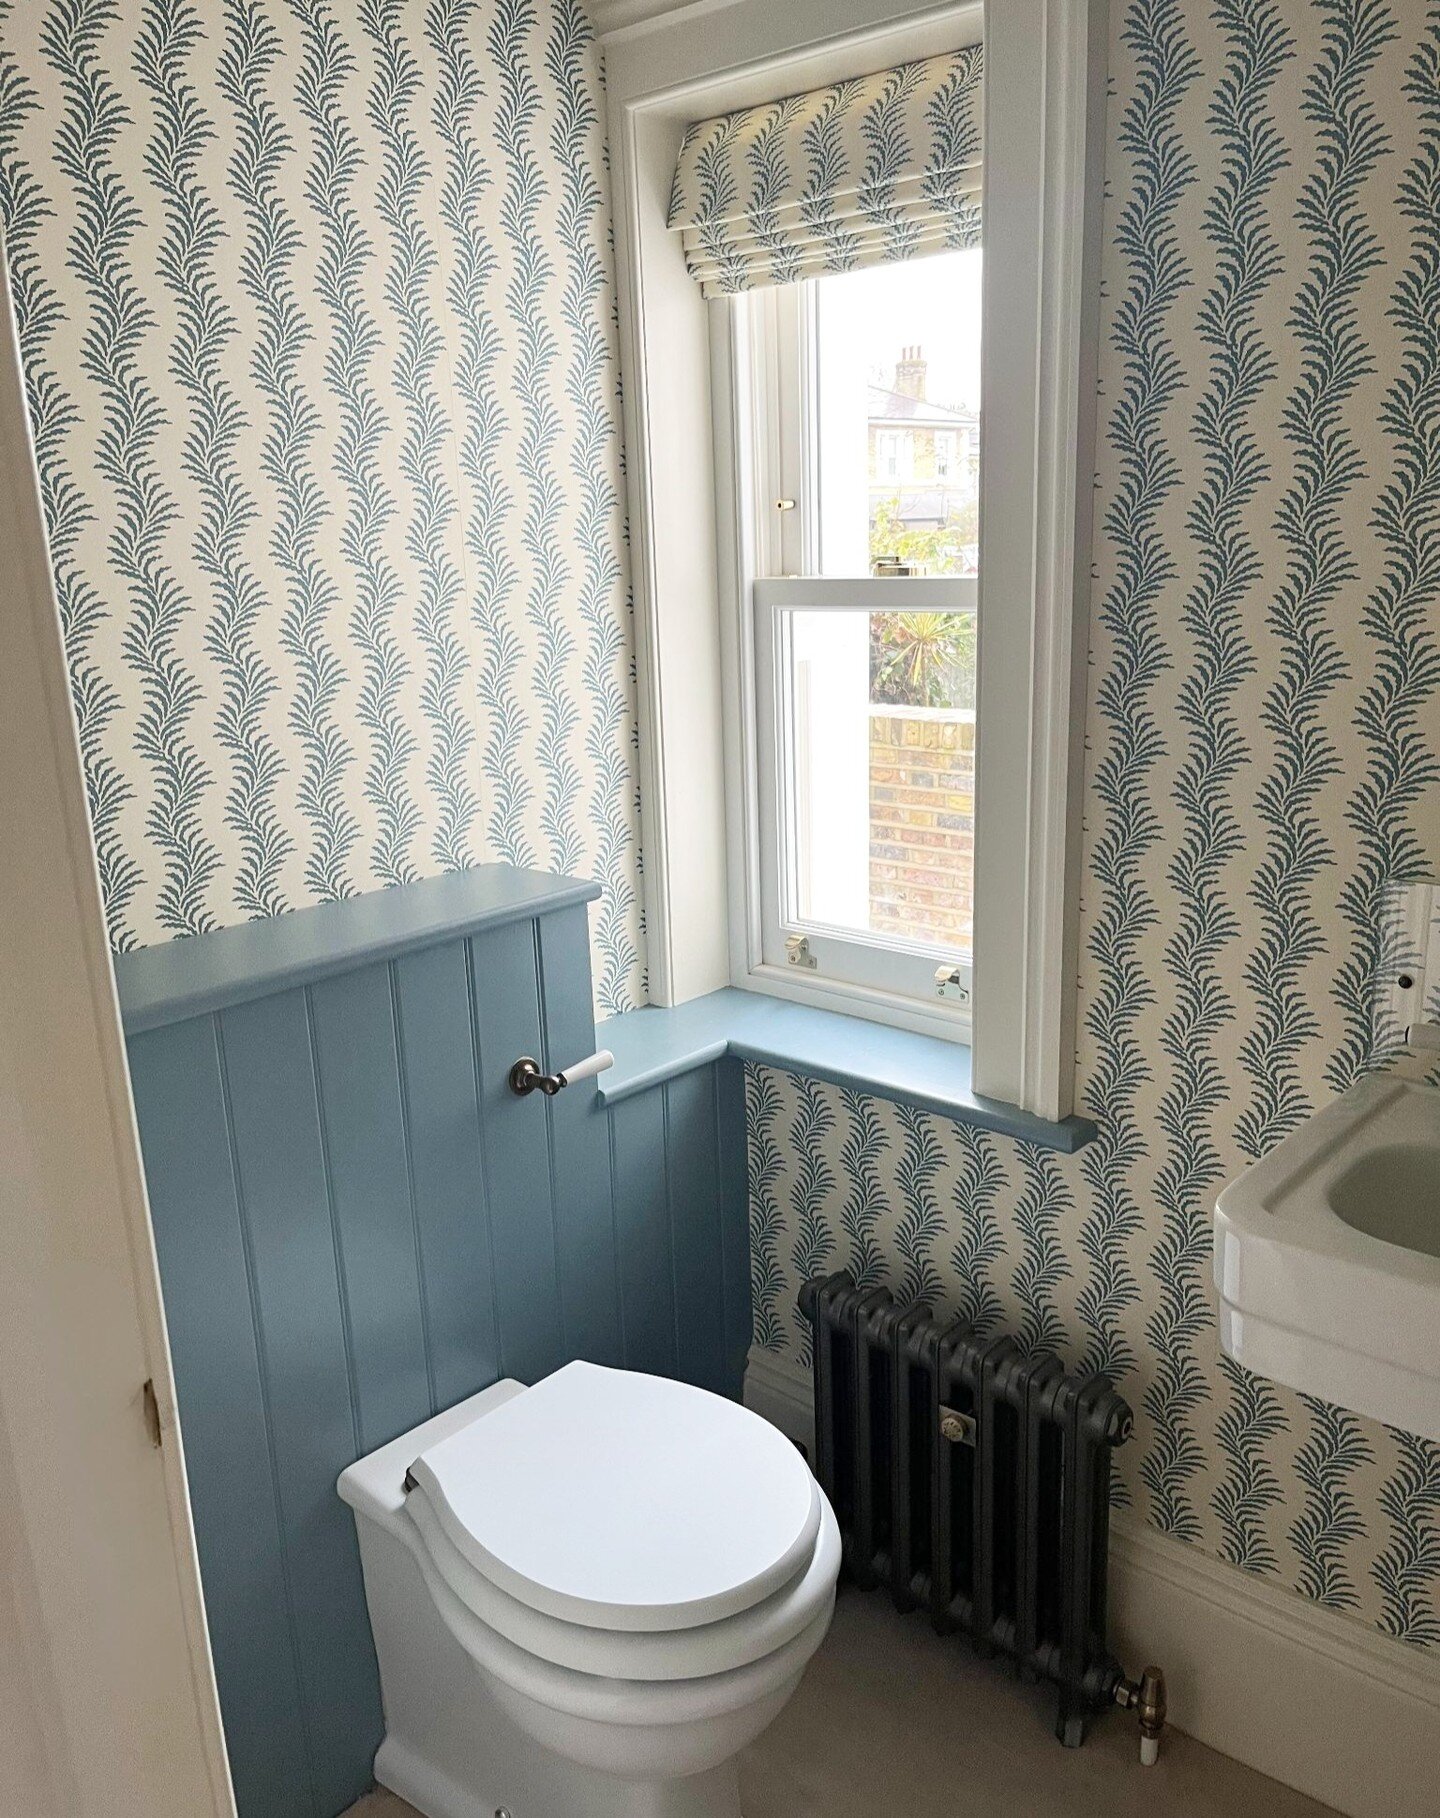 Recently completed downstairs WC 
These two pics are a great example of how beautiful pattern and colour can make all the difference 🚽 💙 #londoninteriors #osbornehodge